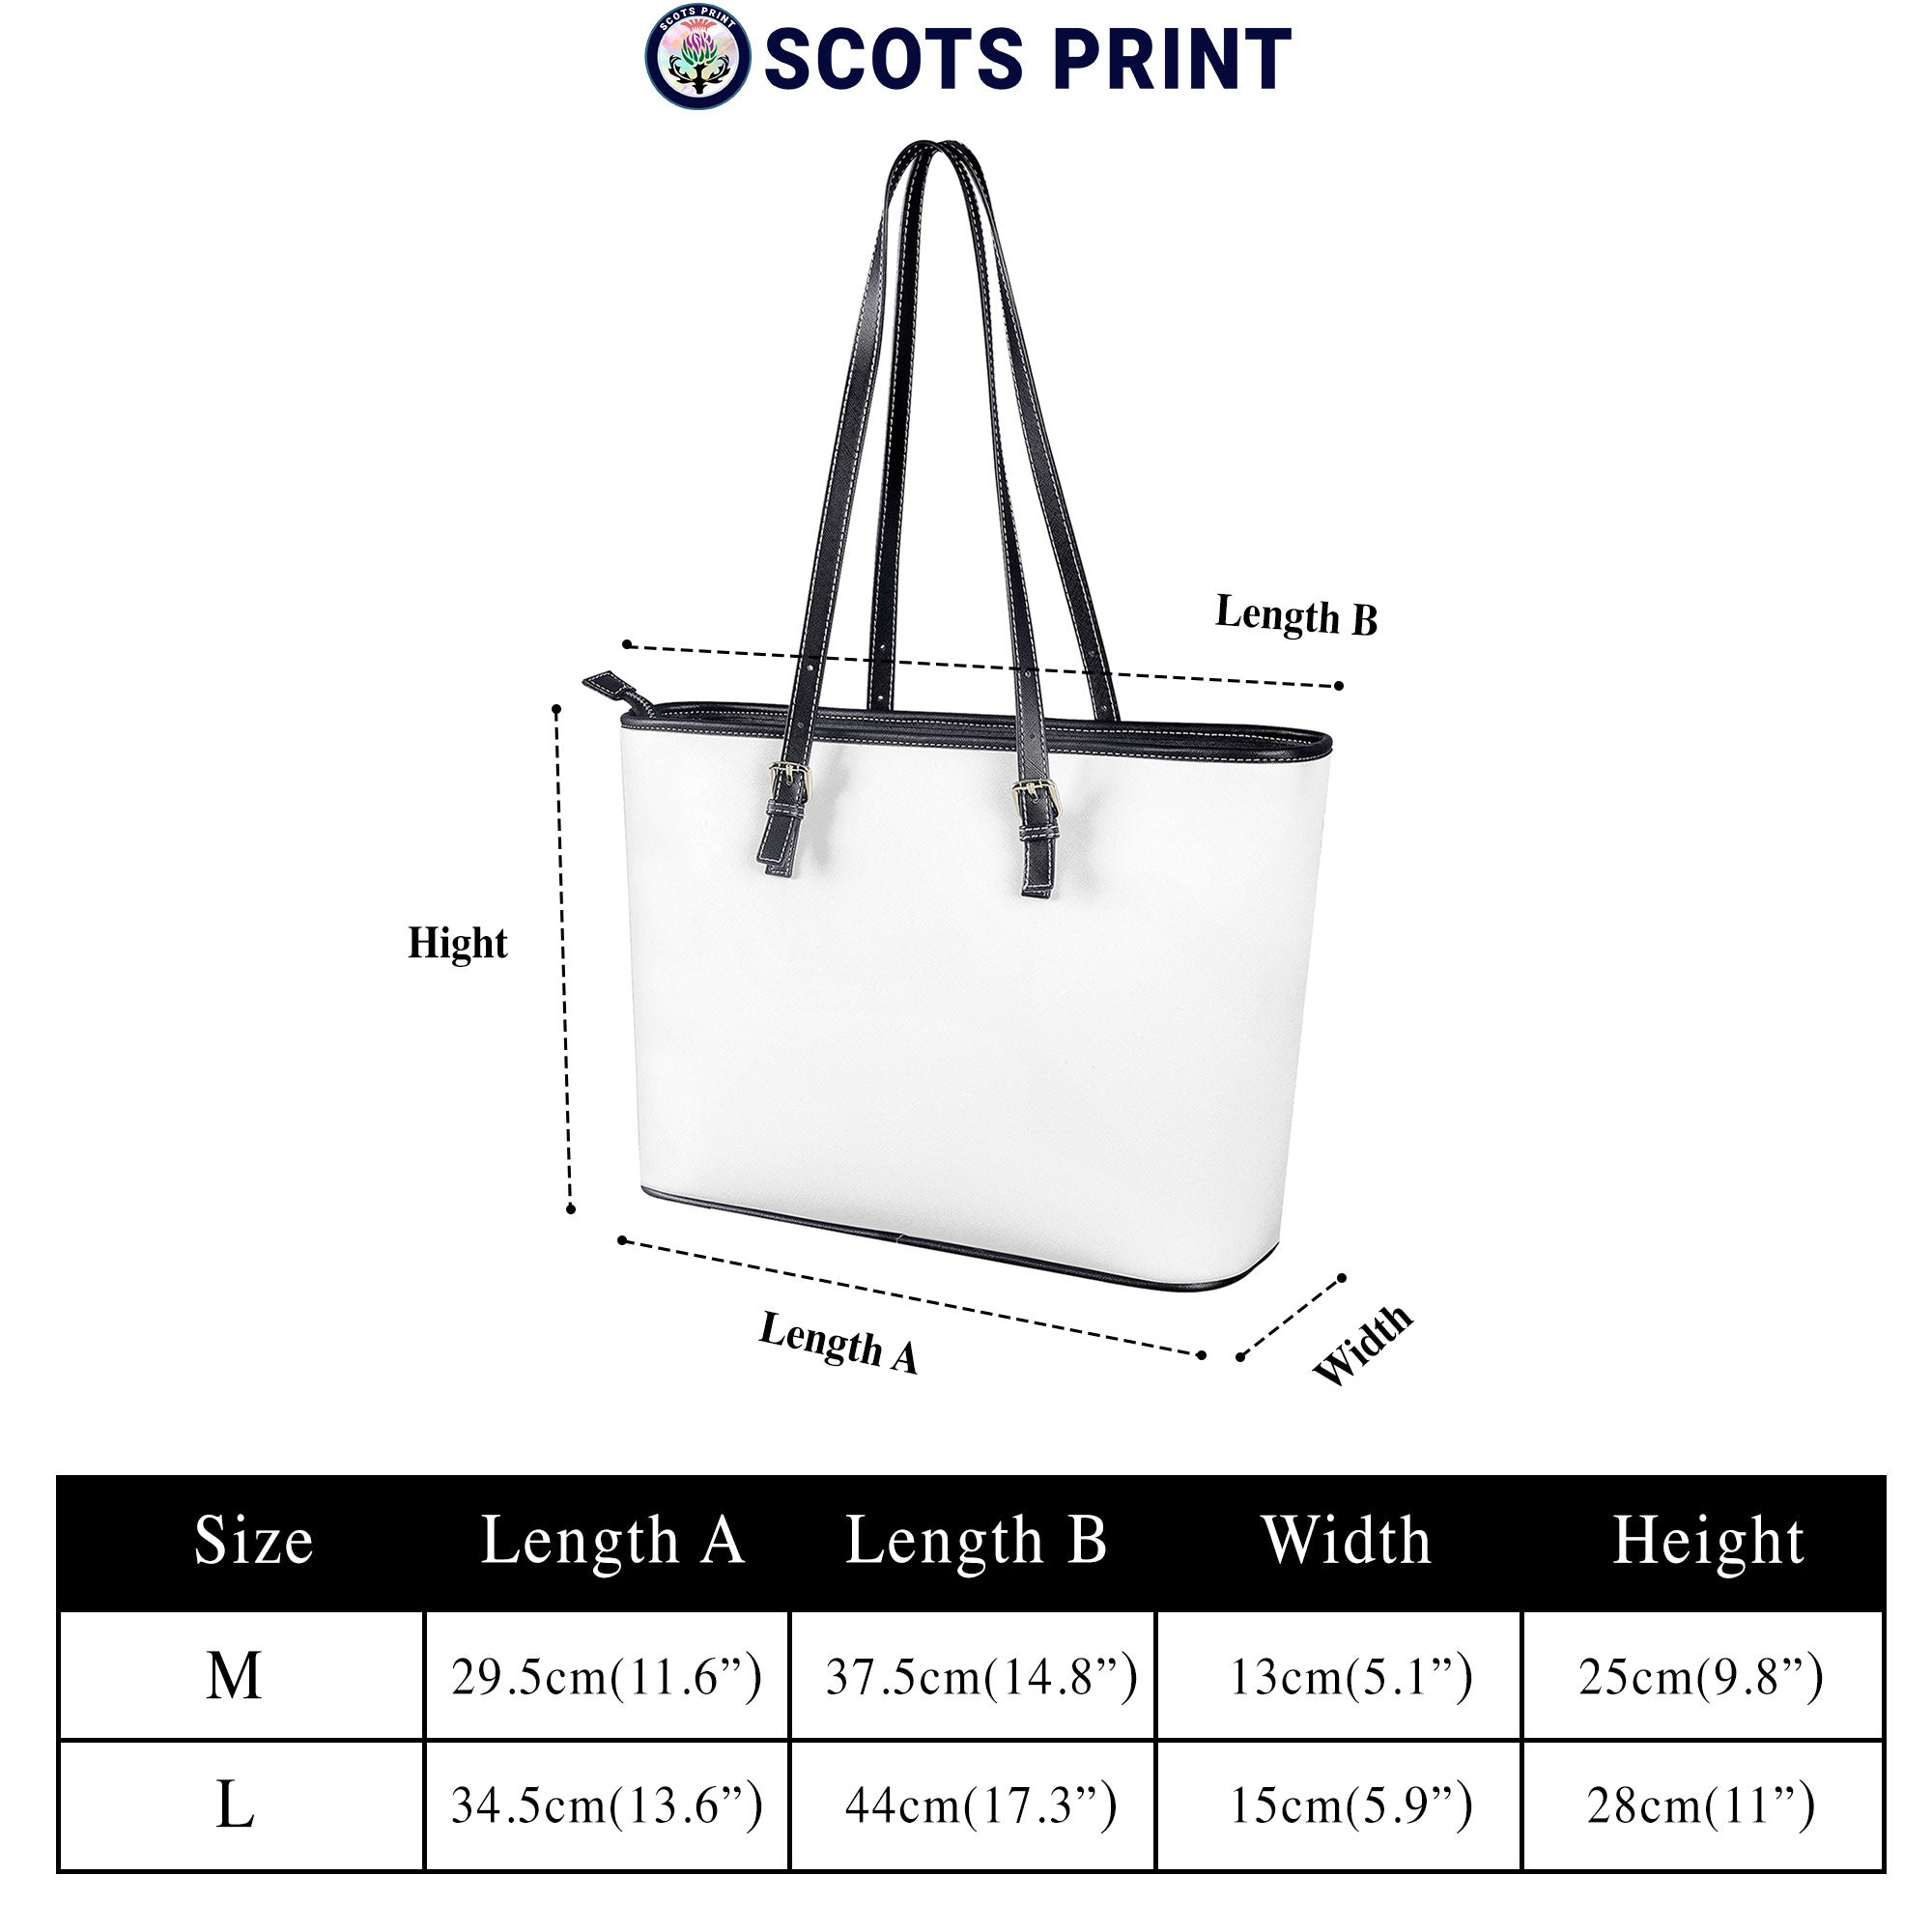 Armstrong Modern Tartan Crest Leather Tote Bag